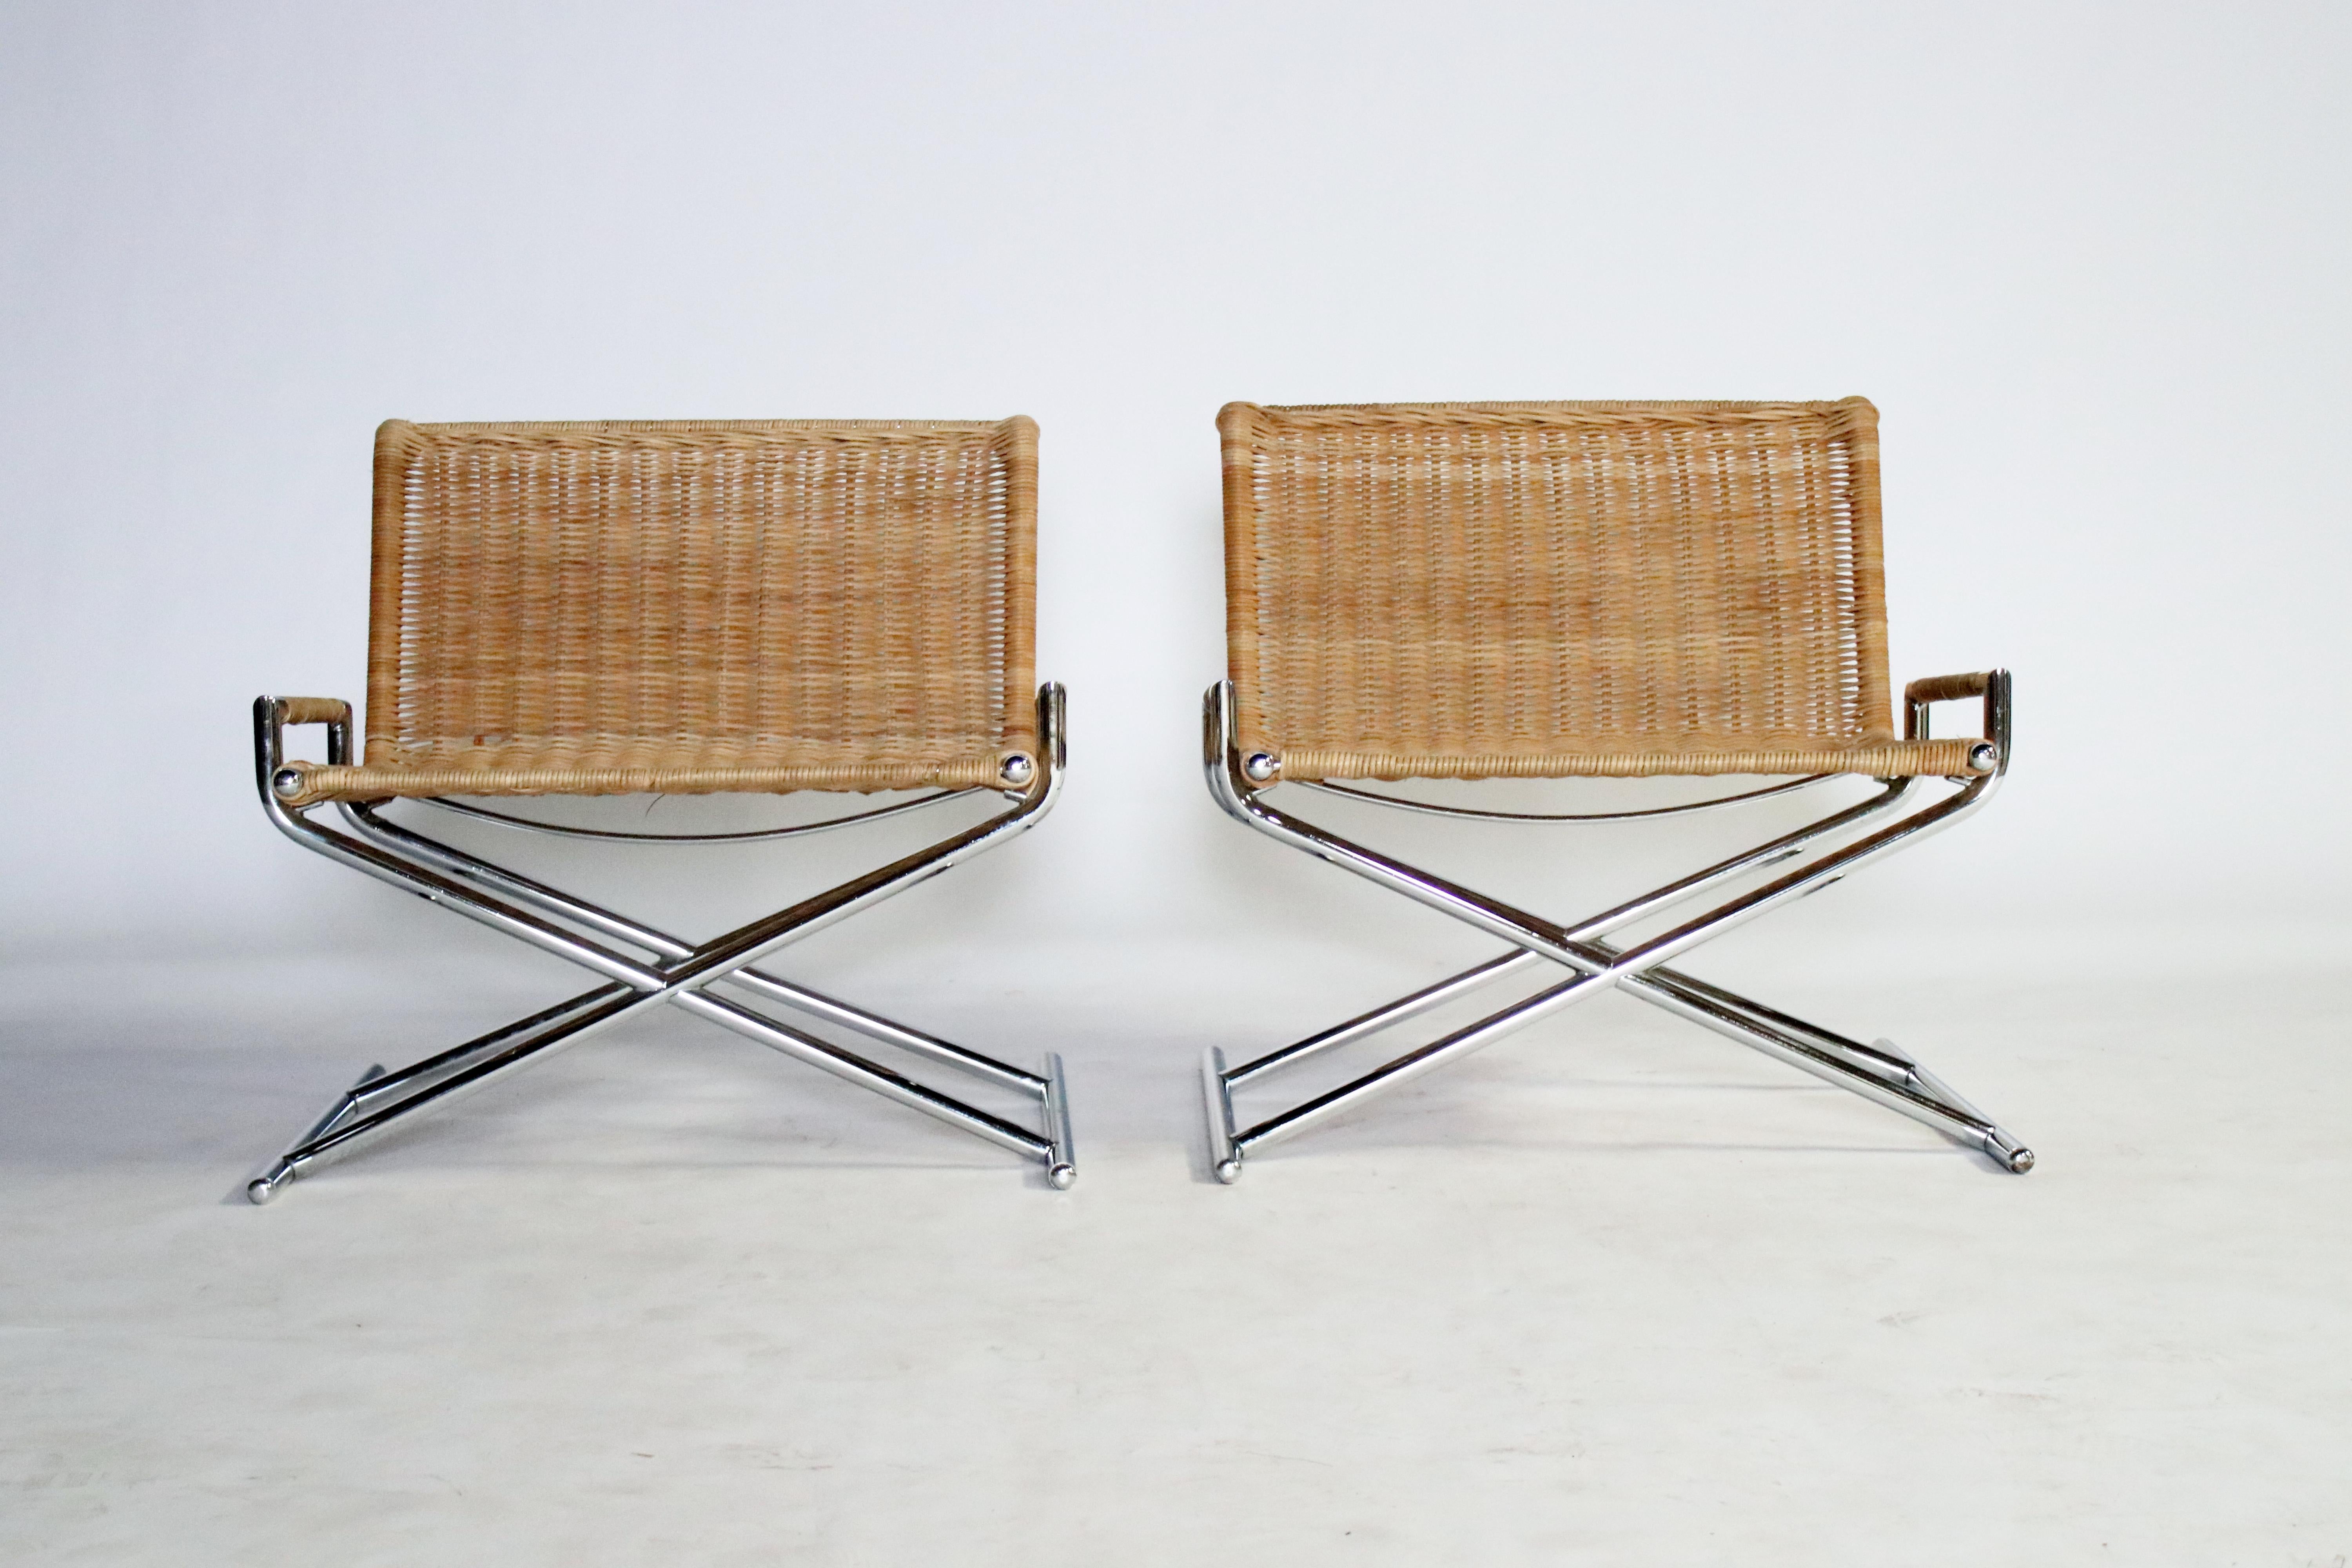 Pair of rattan sled chairs on chrome frame by Ward Bennett for Brickell, 1984. Labelled.